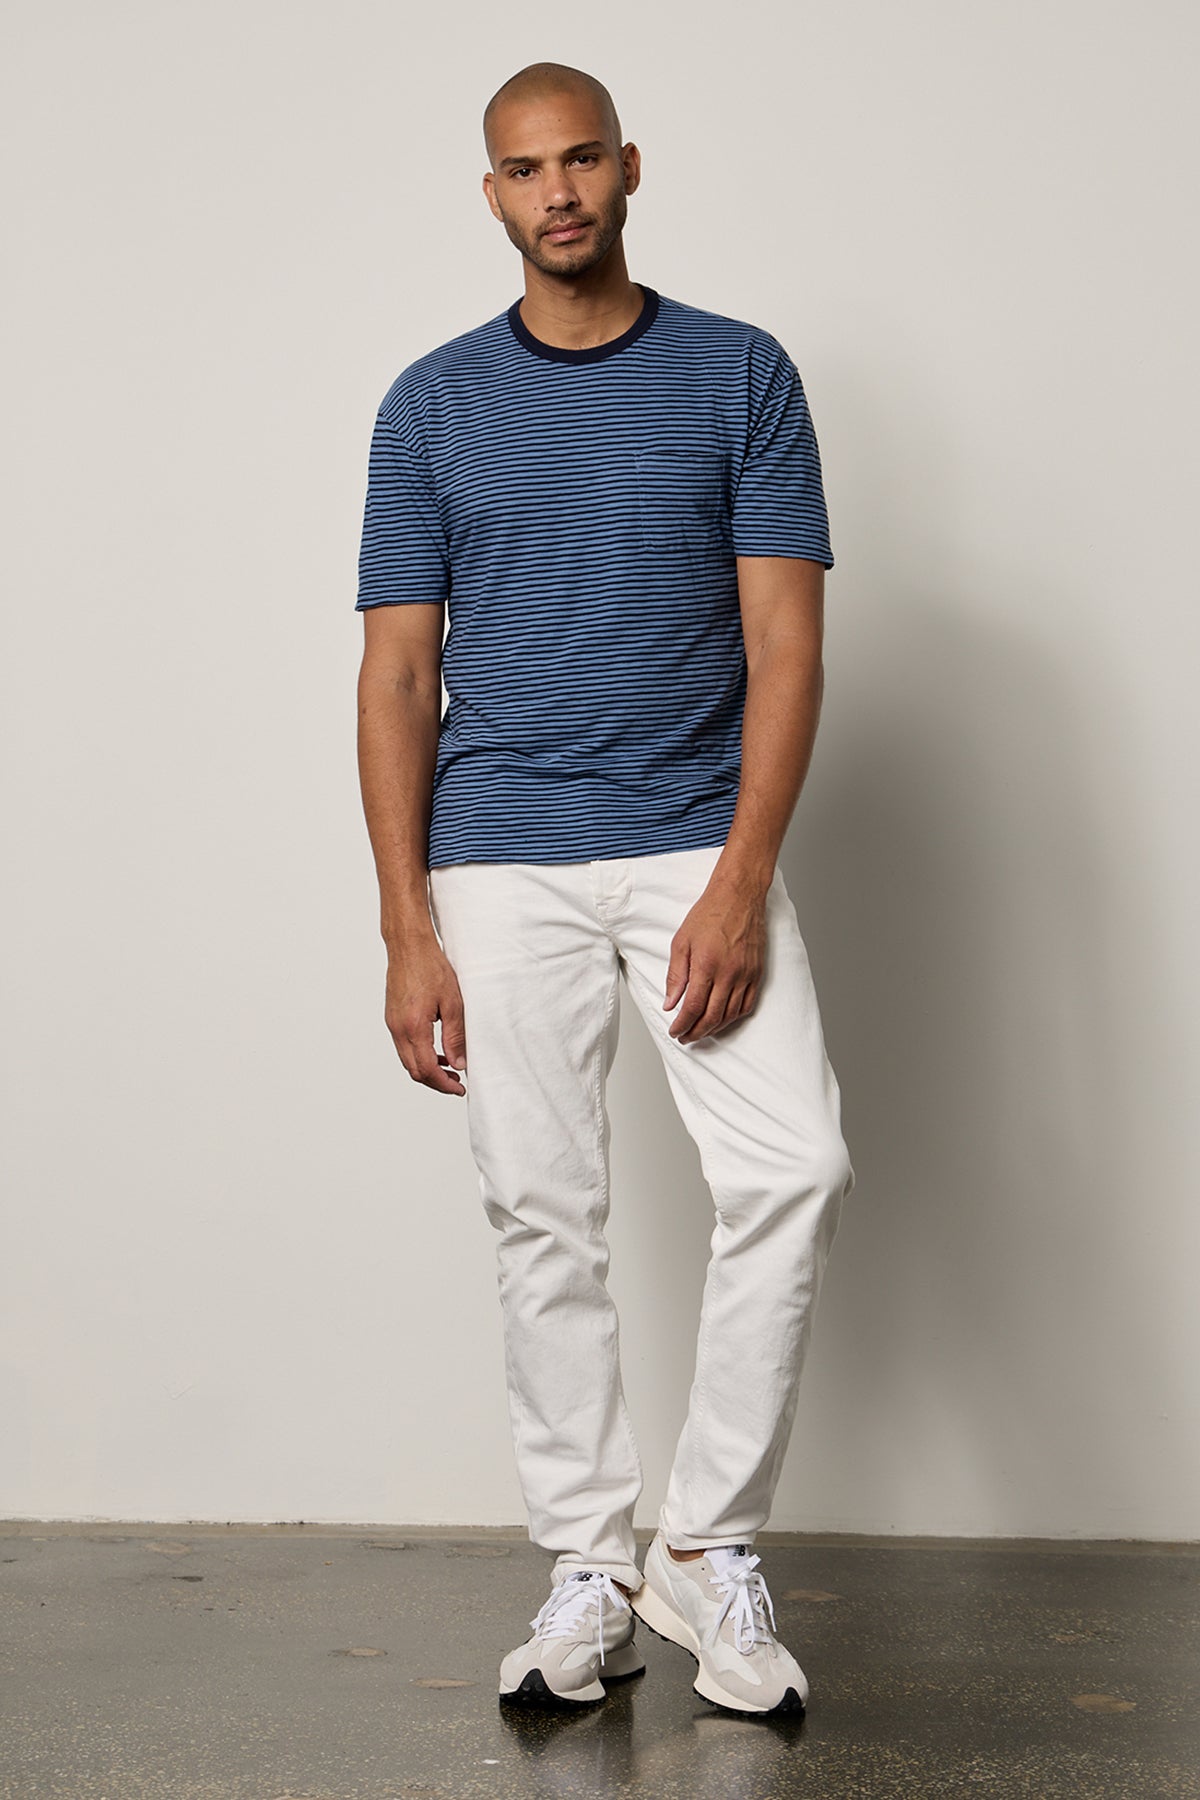 Jeremy Crew Neck Tee with medium and dark blue stripes, front pocket, paired with white denim full length front with New Balance sneakers-26249324265665